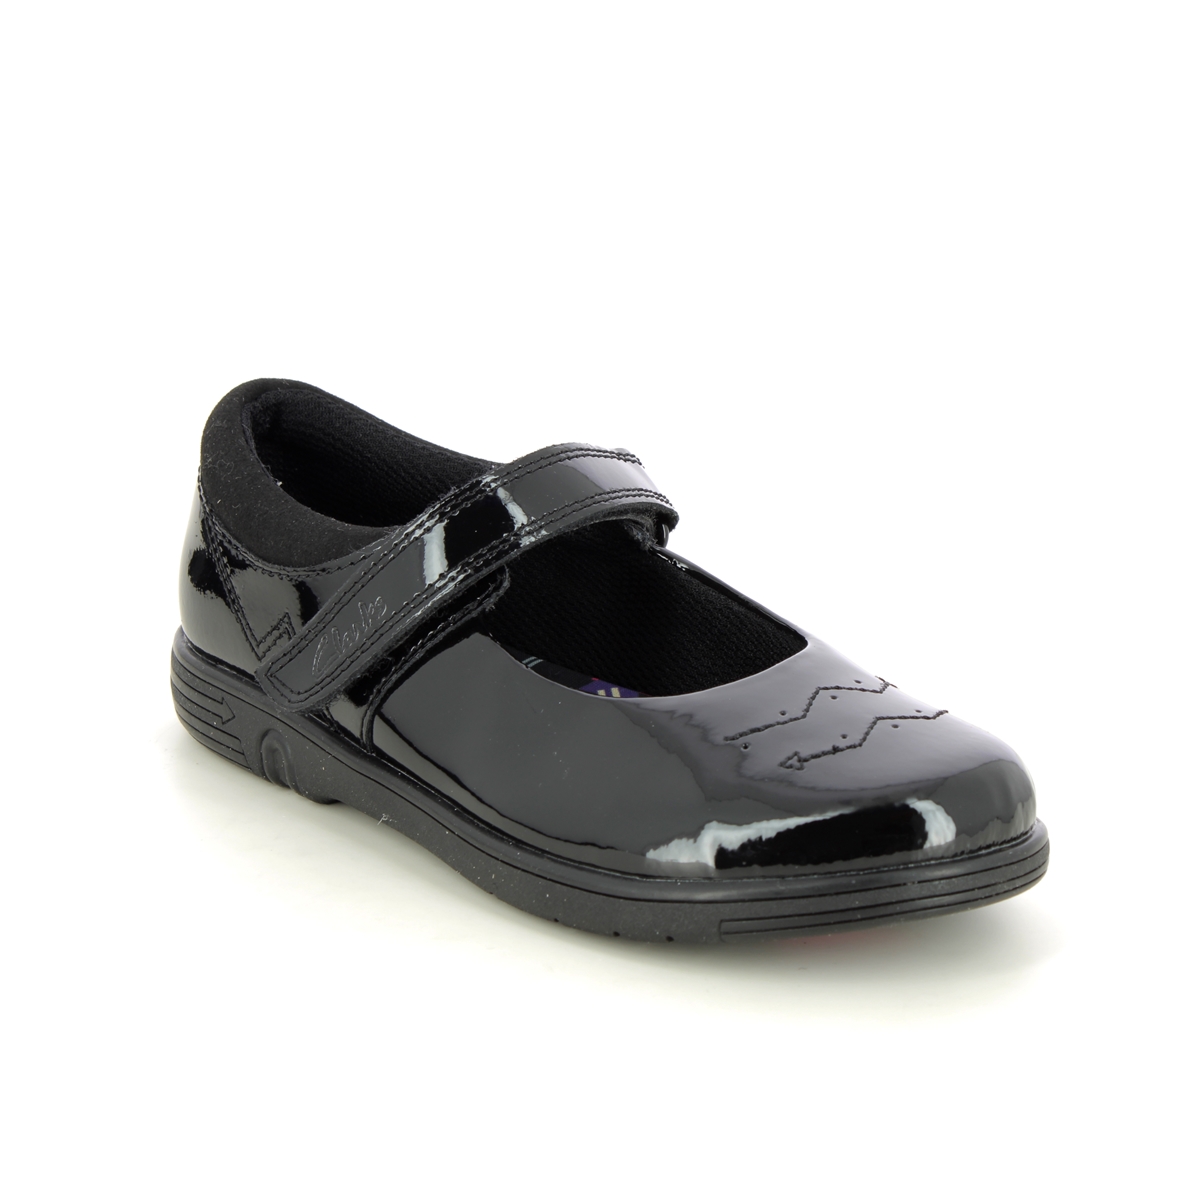 Clarks Jazzy Jig K Mary Jane Black Patent Kids Girls School Shoes 753086F In Size 10 In Plain Black Patent F Width Fitting Regular Fit For School For